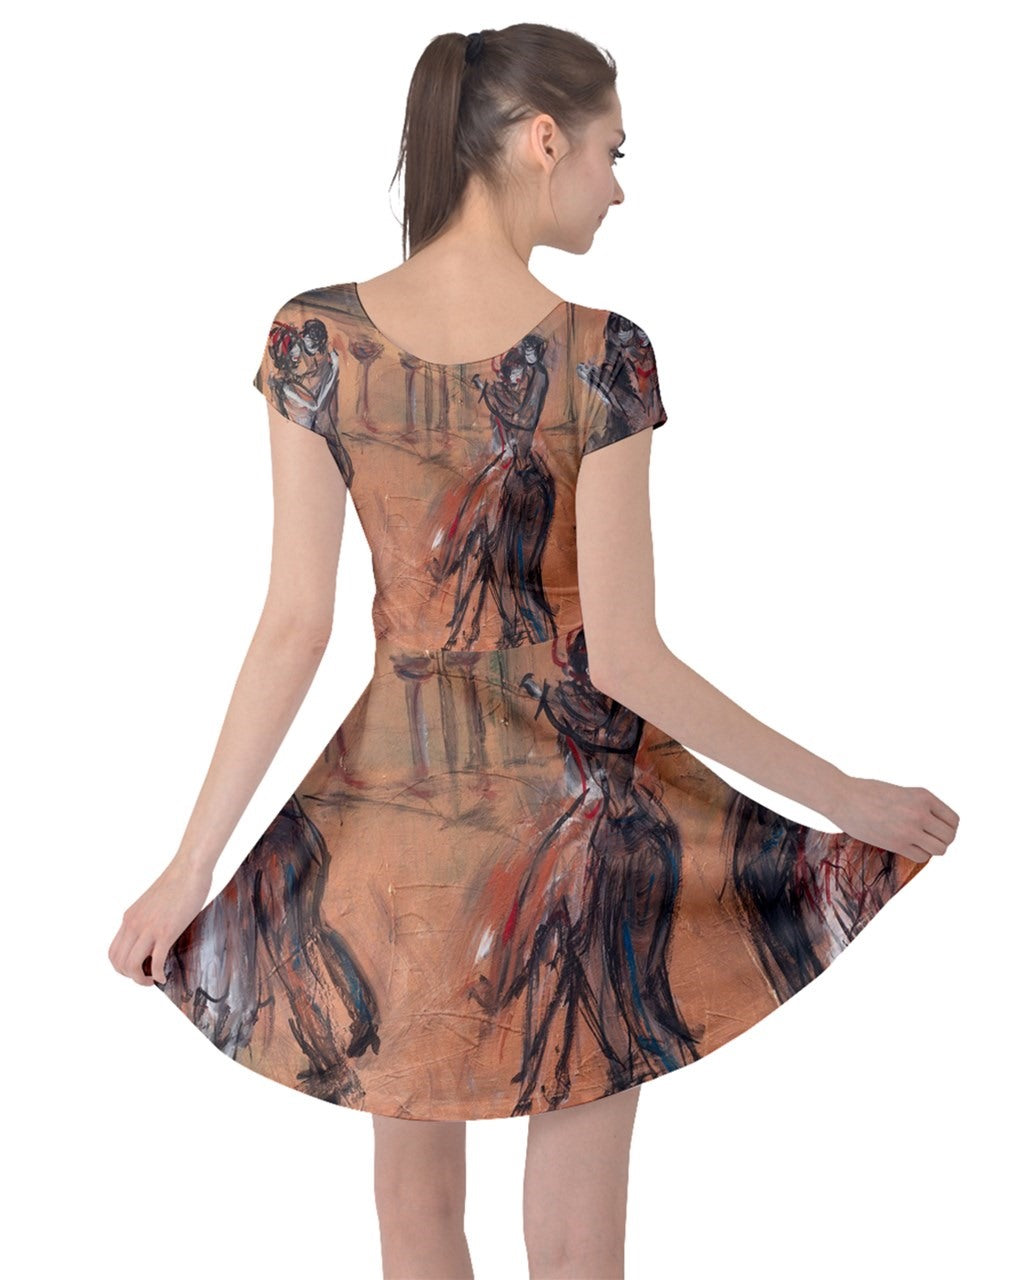 A dress with a vibrant, original art print by Leeorah, designed to flatter all sizes. The dress features a relaxed silhouette and soft fabric, promising comfort and style for any occasion. Back view